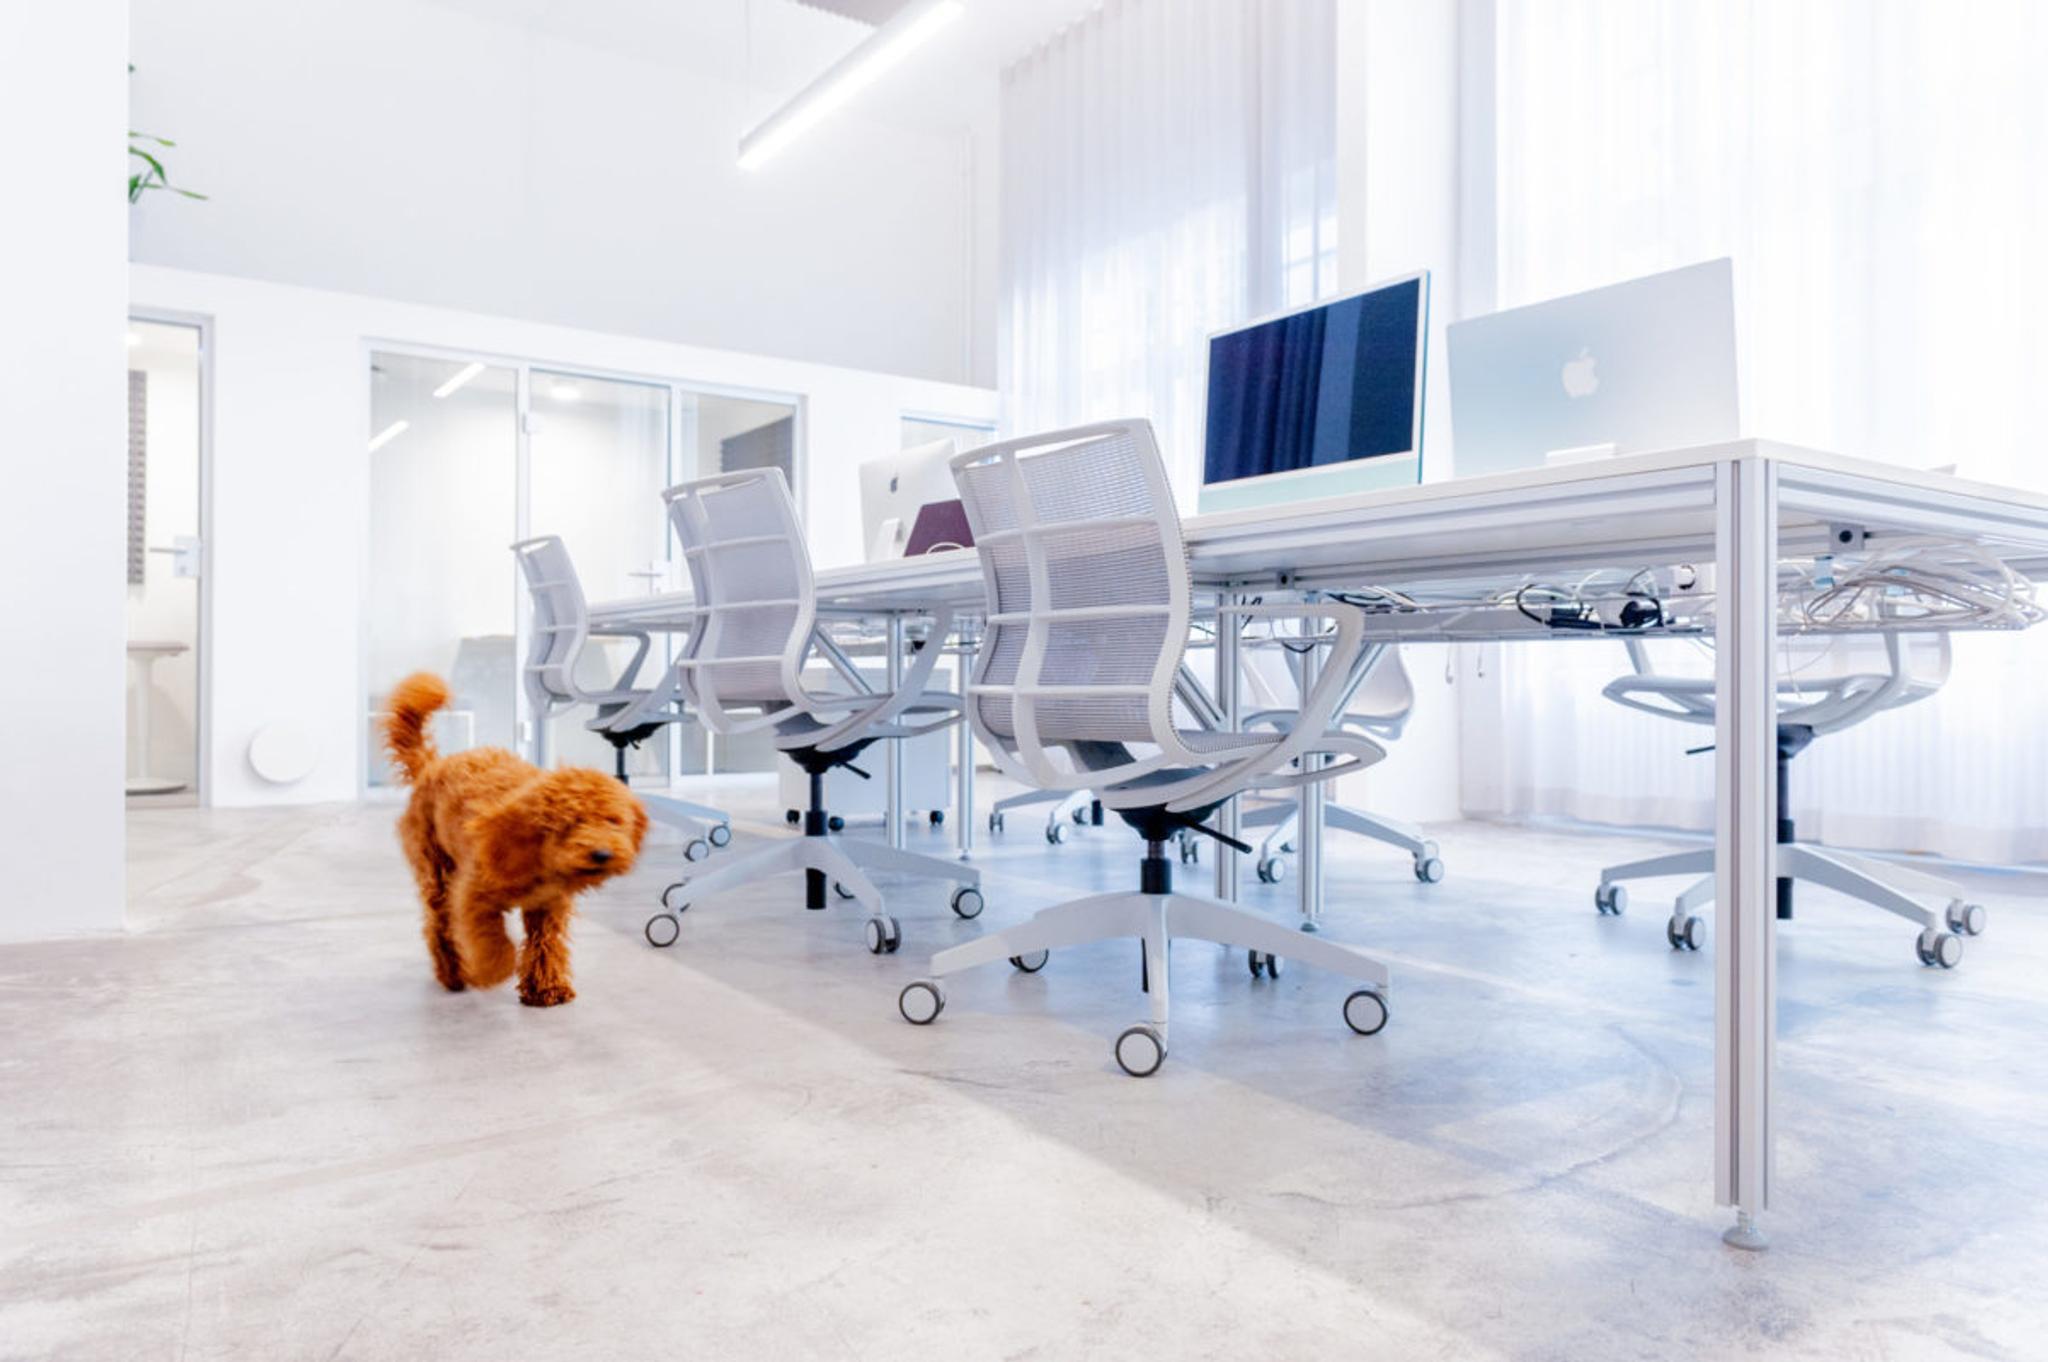 A cockapoo dog trots through the Battle Royal Studios office space.